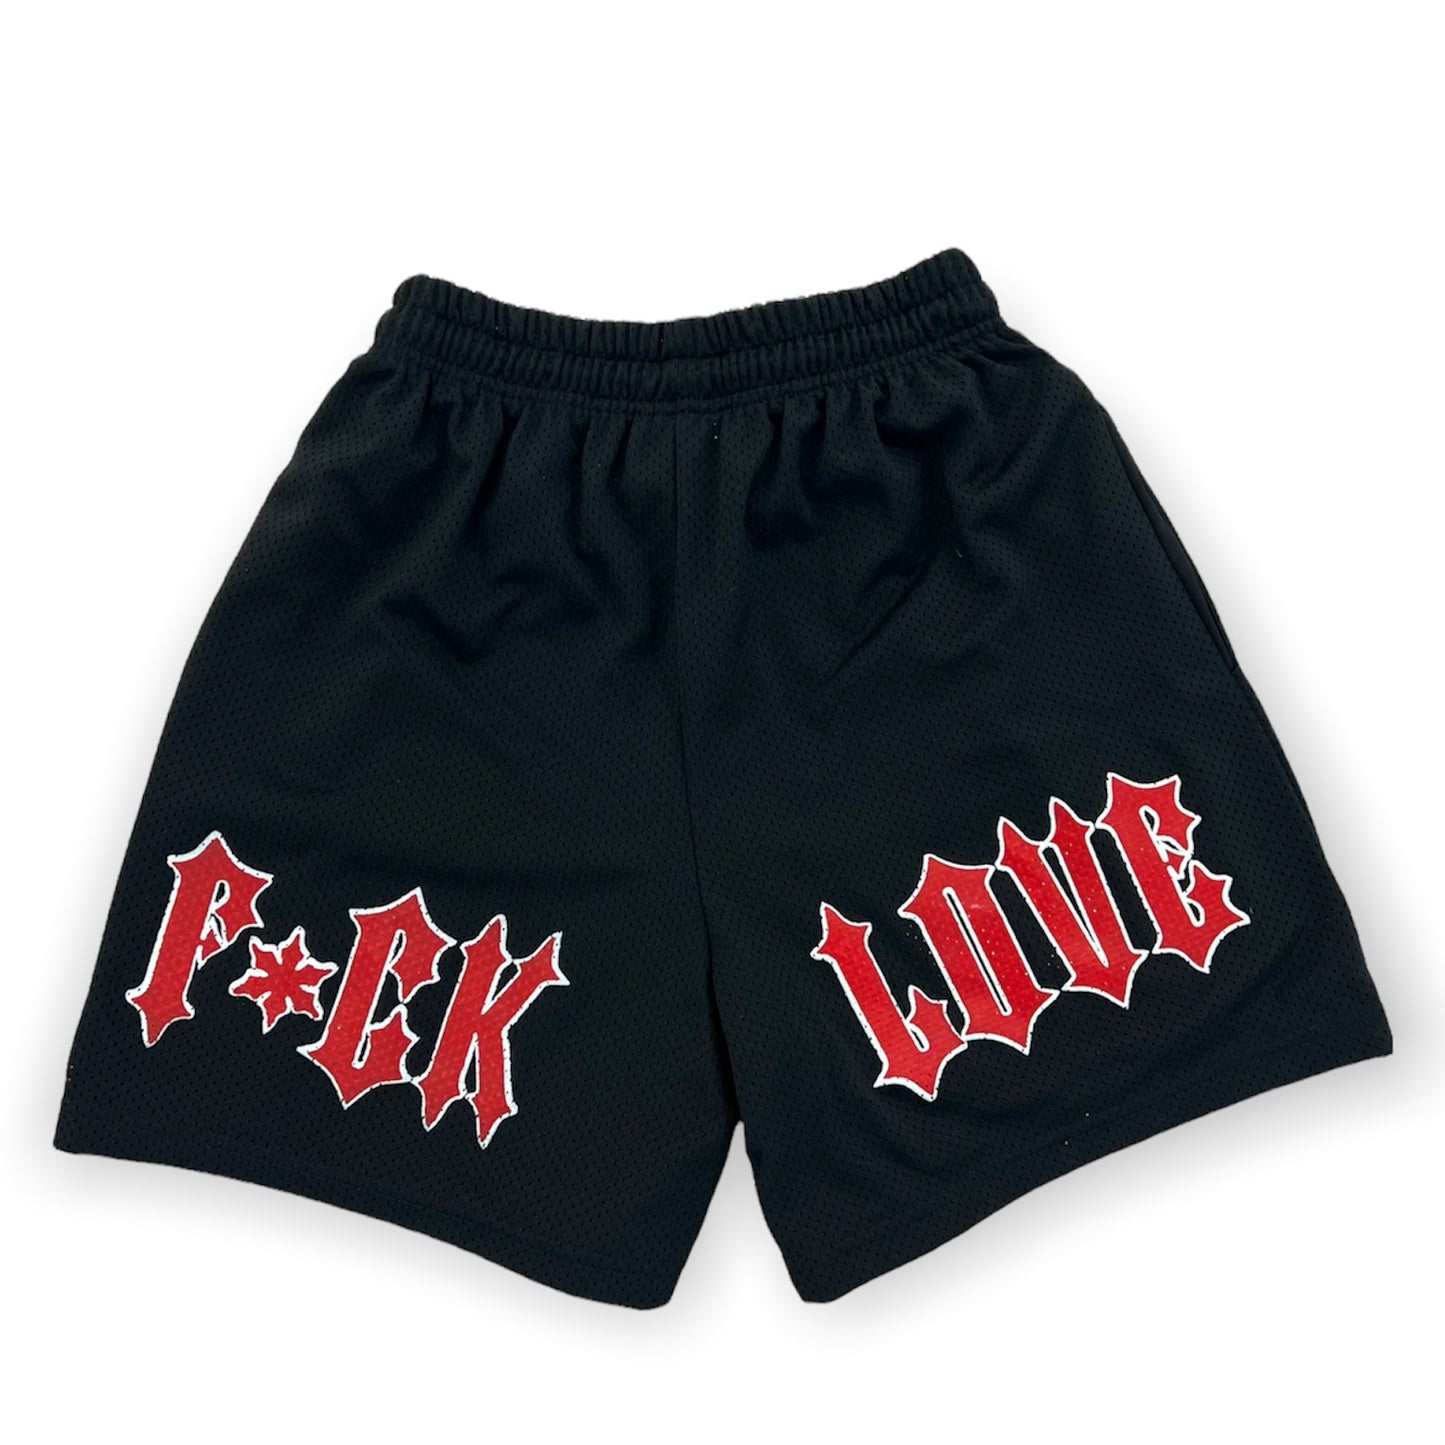 EVOL F*ck Love Shorts Black and Red